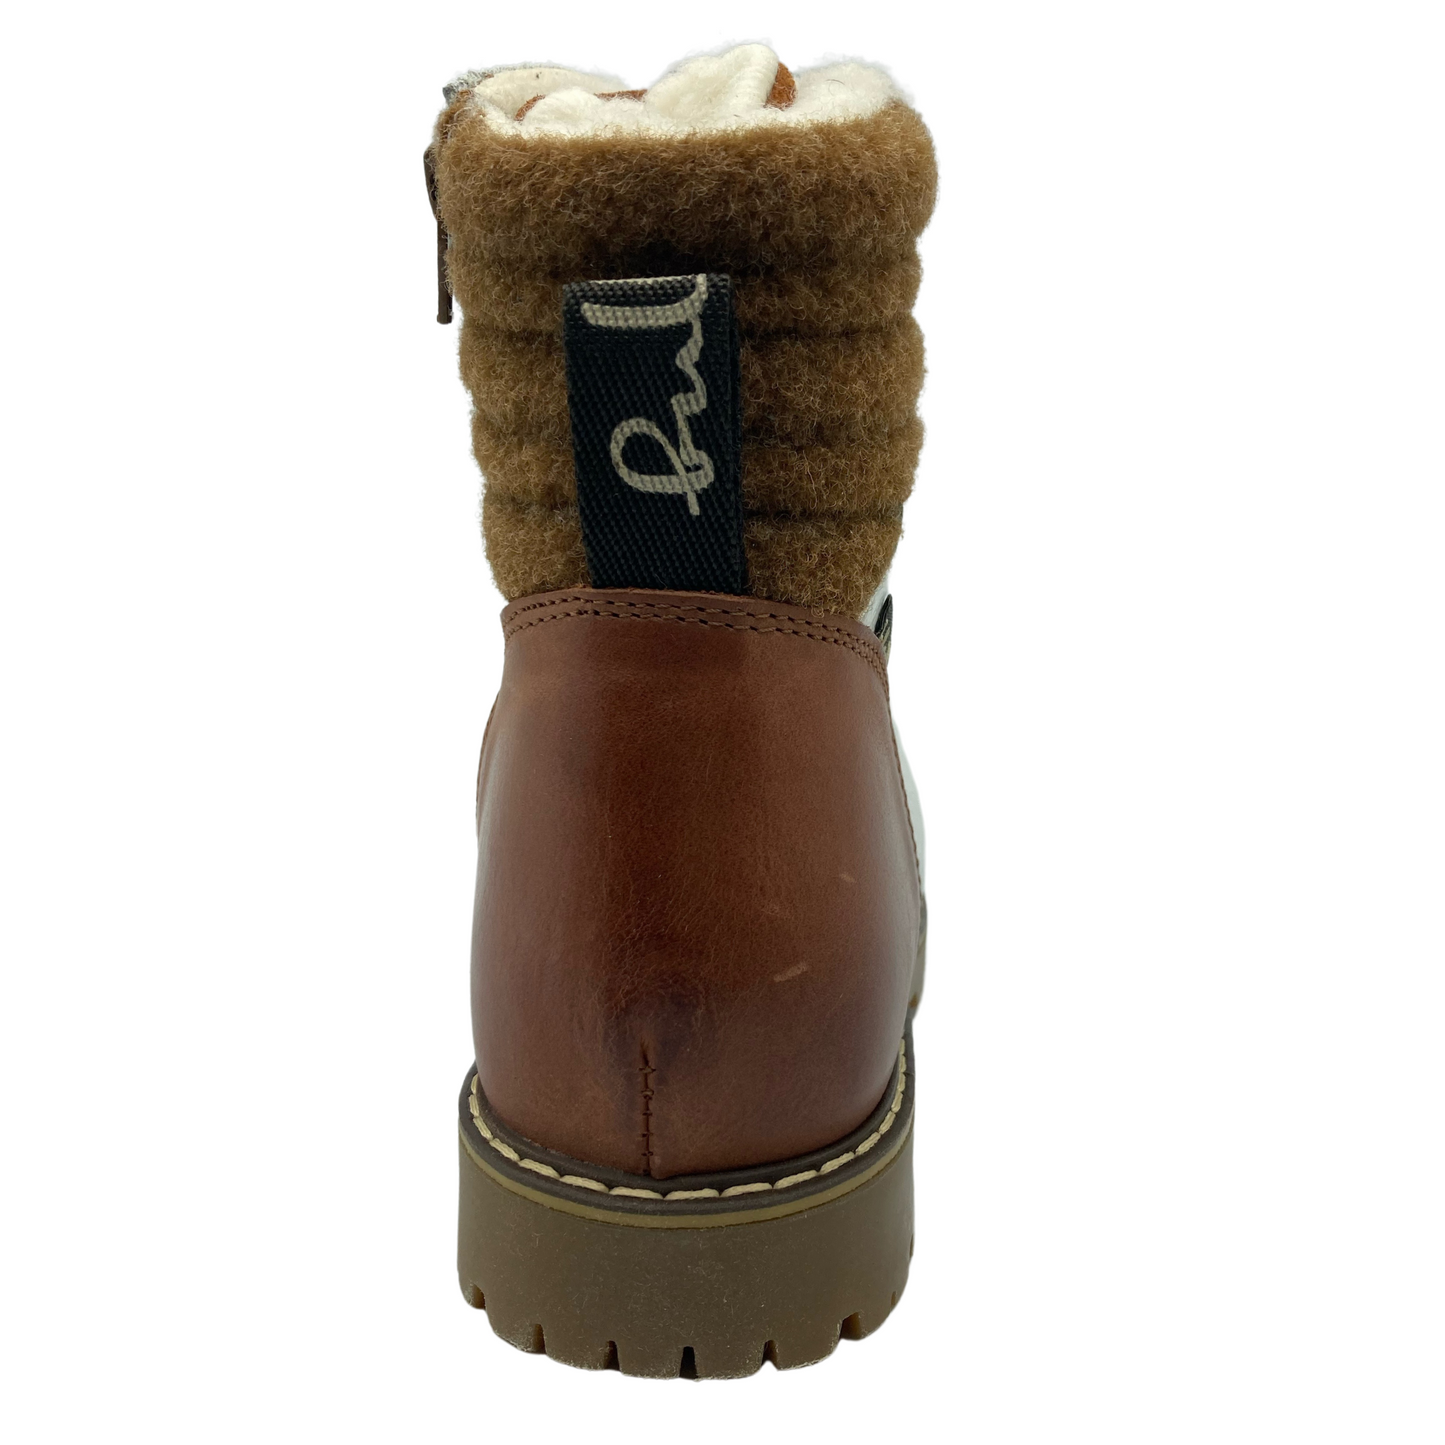 Back view of leather winter boot with rubber heel and side zipper closure